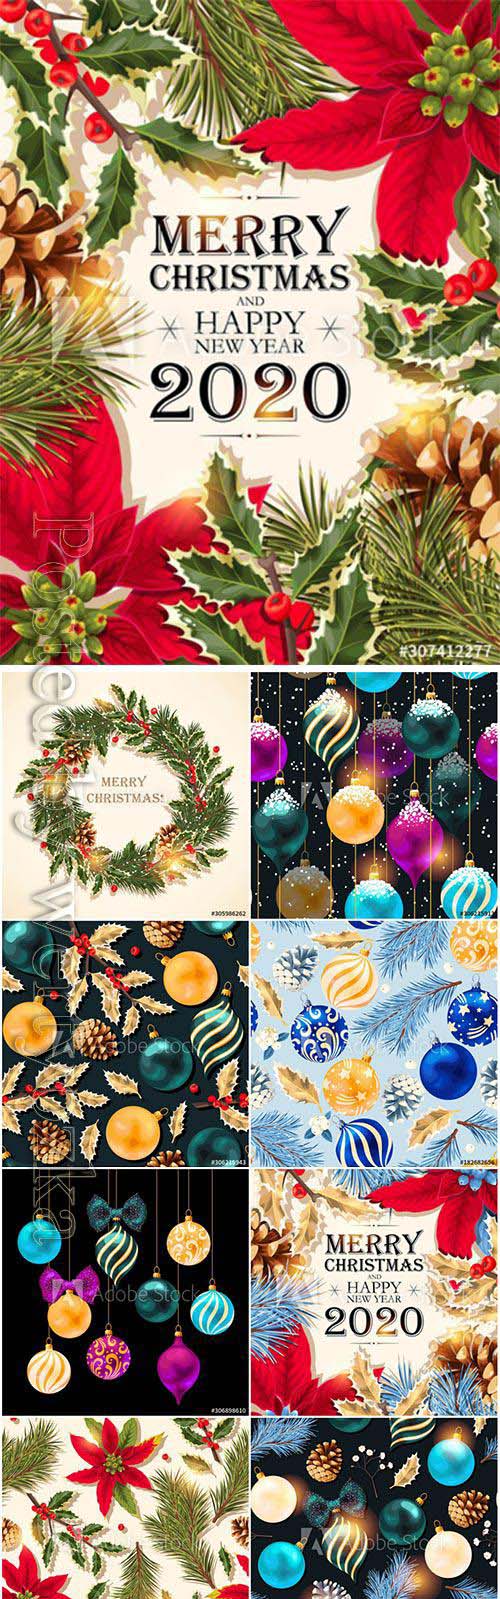 Christmas and New Year vector backgrounds with decorations